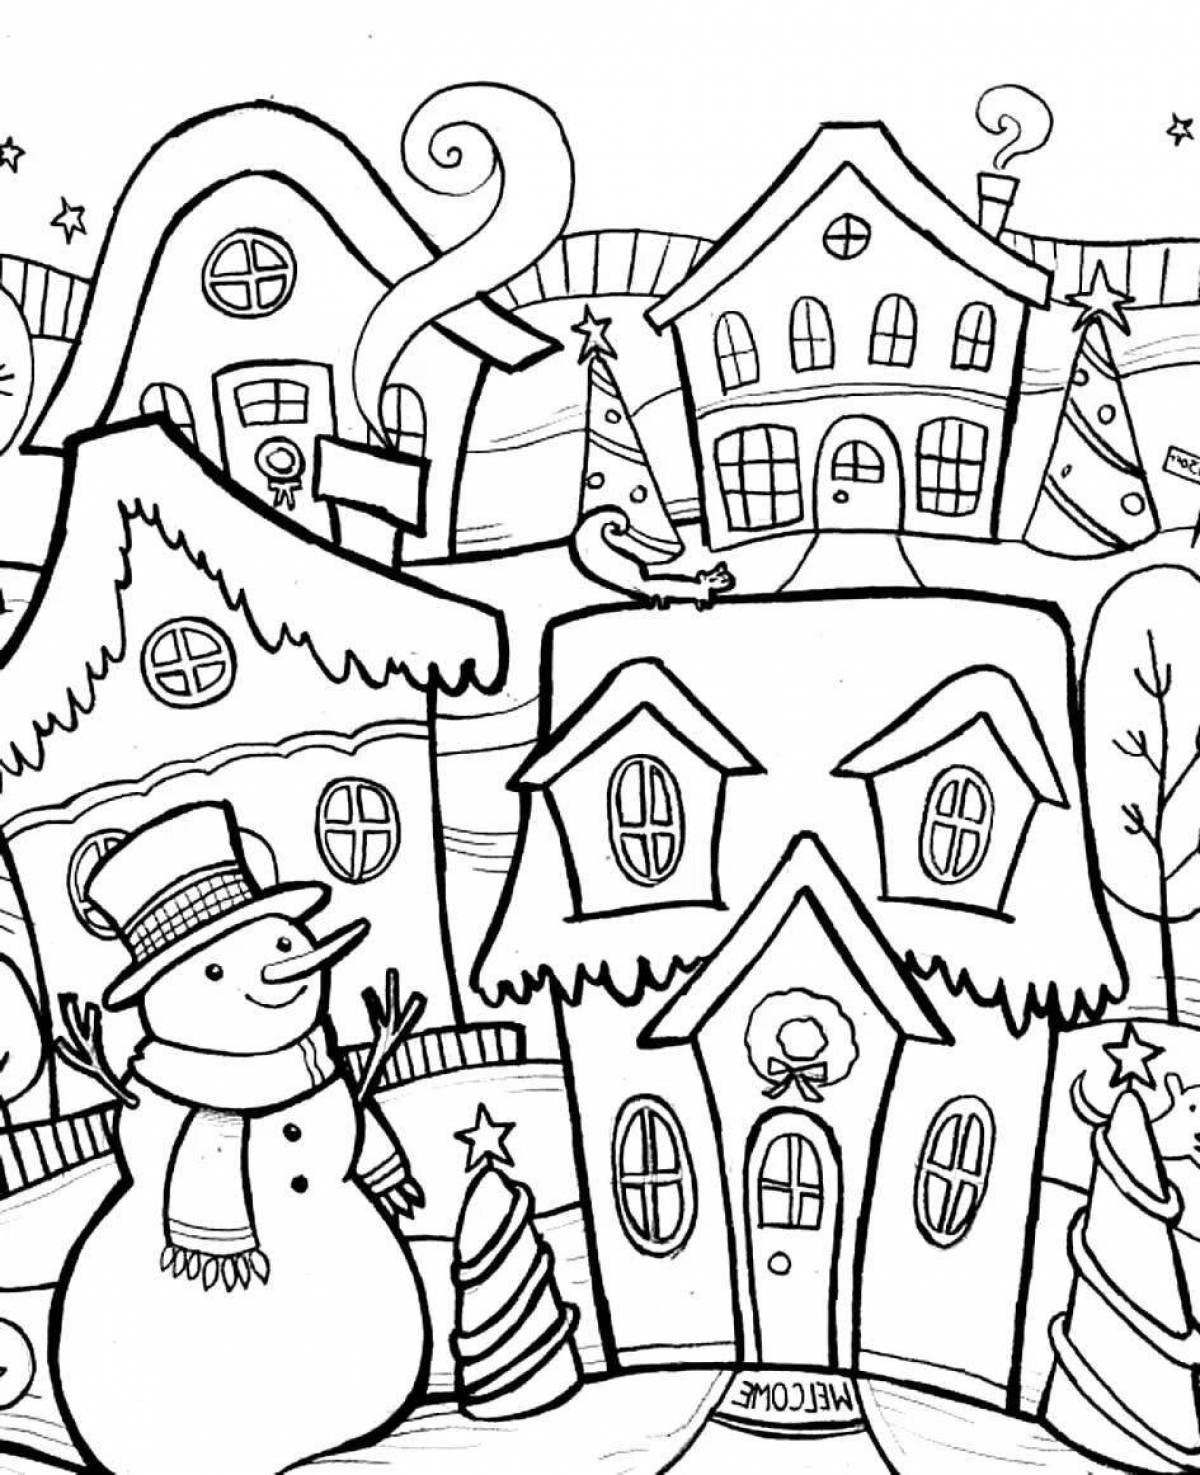 Large winter Christmas coloring book